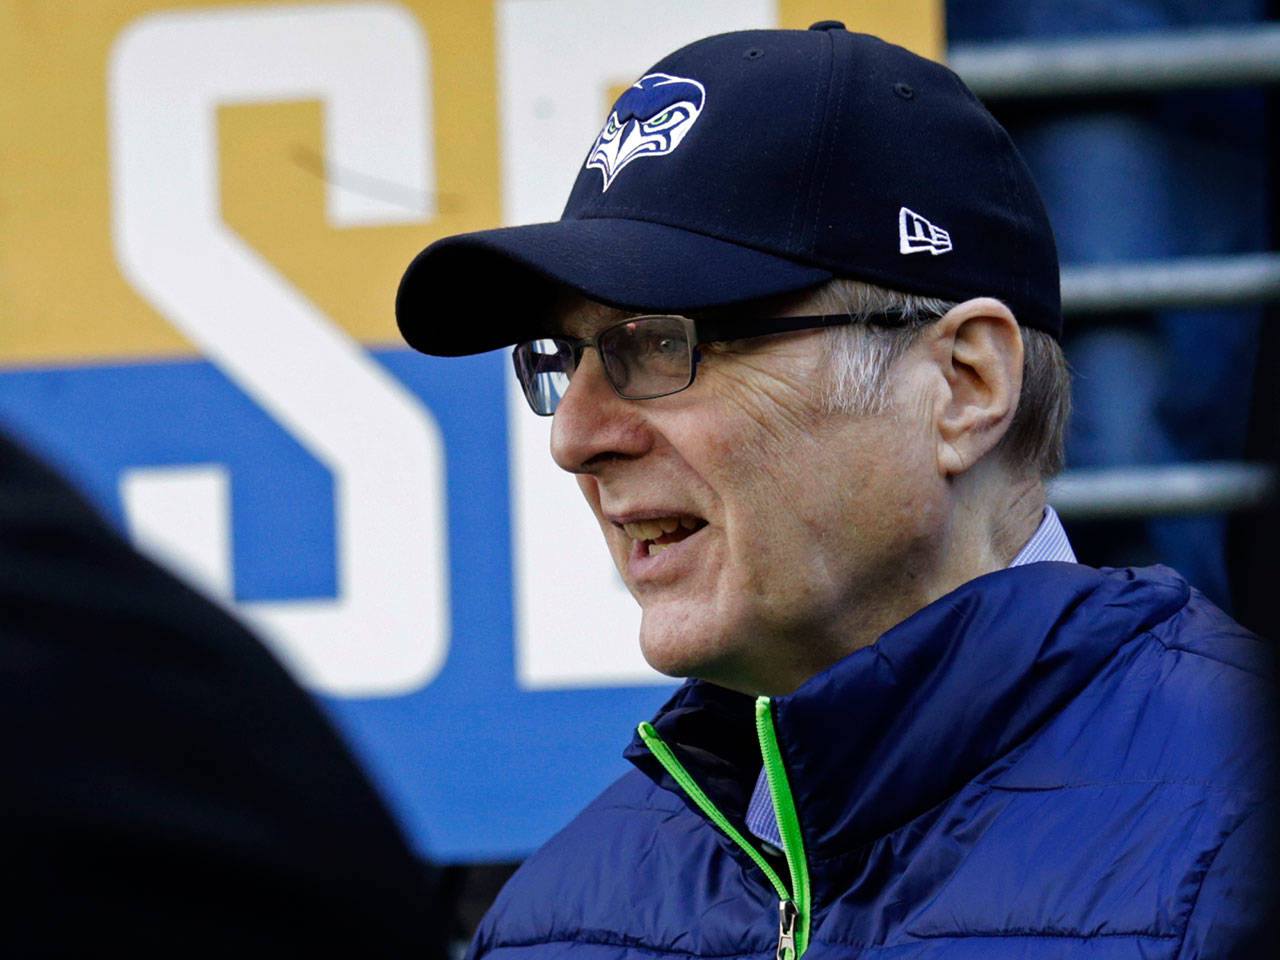 Seahawks owner Paul Allen stands near the field before a game against the Cardinals on Dec. 31, 2017, in Seattle. Allen, who co-founded Microsoft with his childhood friend Bill Gates before becoming a billionaire philanthropist who invested in conservation, space travel, arts and culture and professional sports, died Monday, Oct. 15, 2018. He was 65. (AP Photo/John Froschauer)